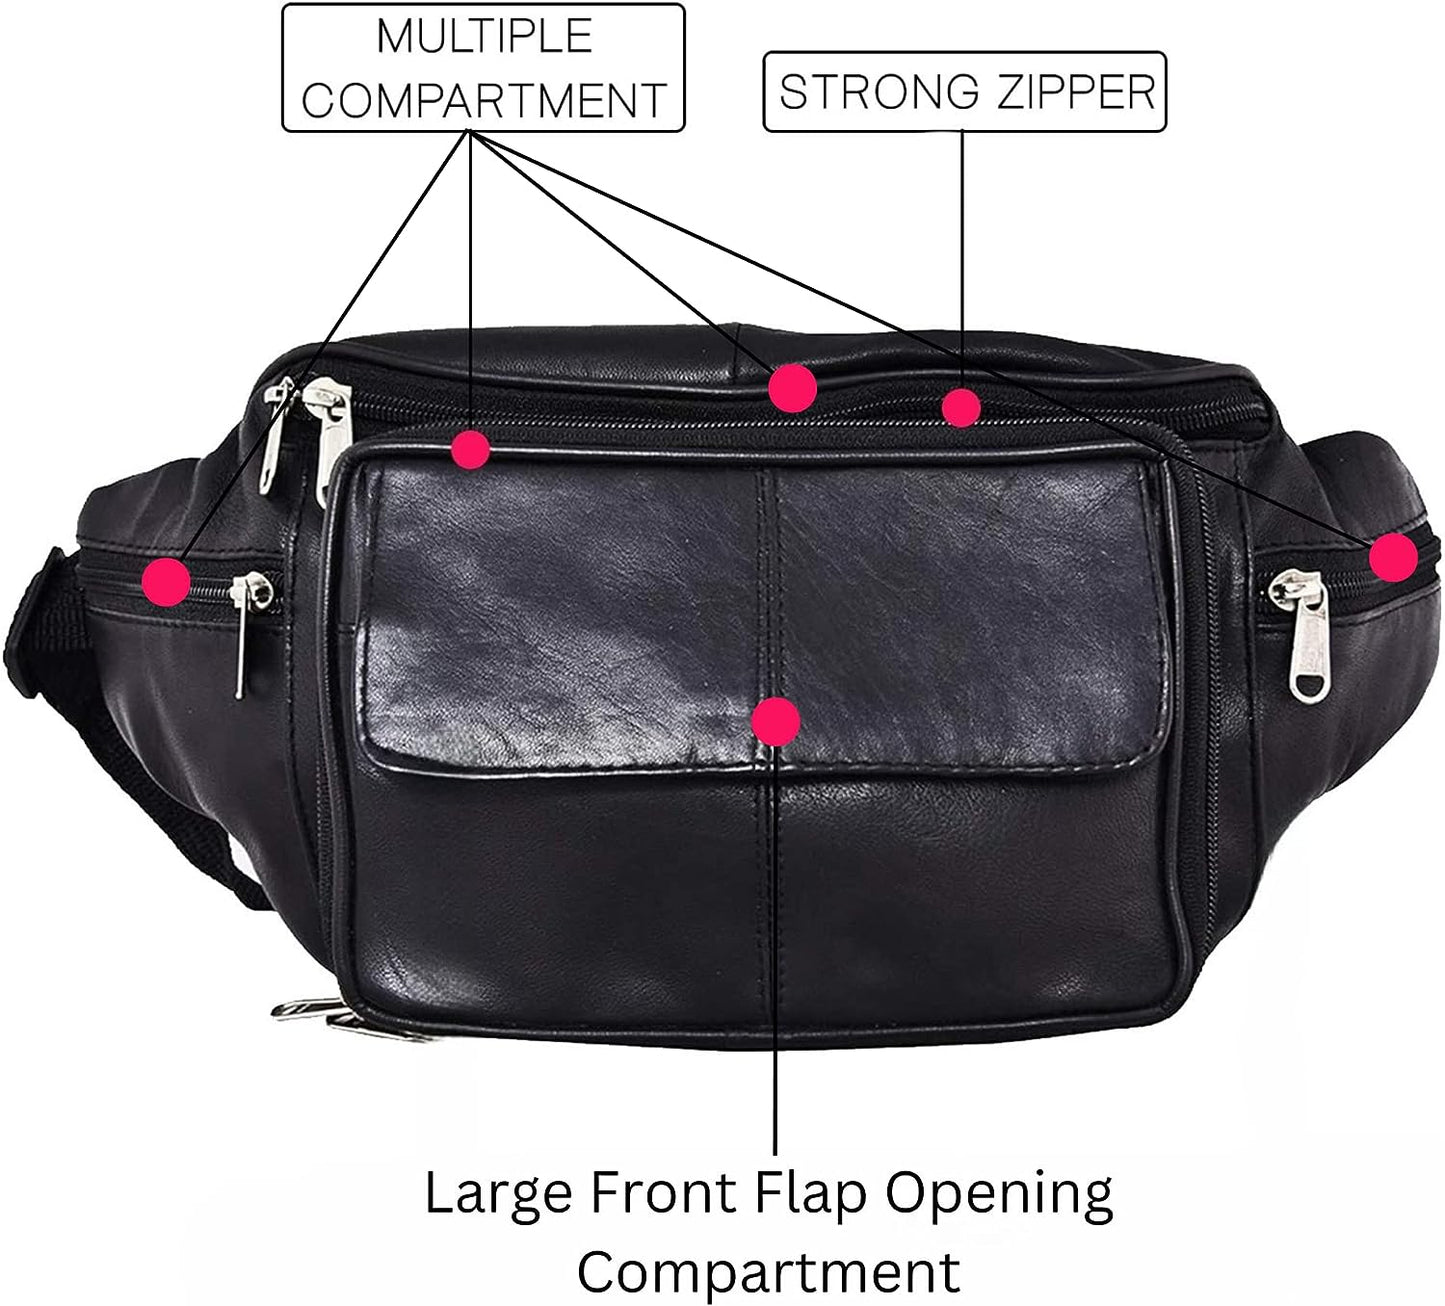 Liberty Leather waist bag, Multi-Pocket Fanny Pack Men and Women, Black Fanny Bag, Adjustable Waist Strap For Walking, Fashion, Cycling, 7 Pocket Large Waist Pouch Organizer